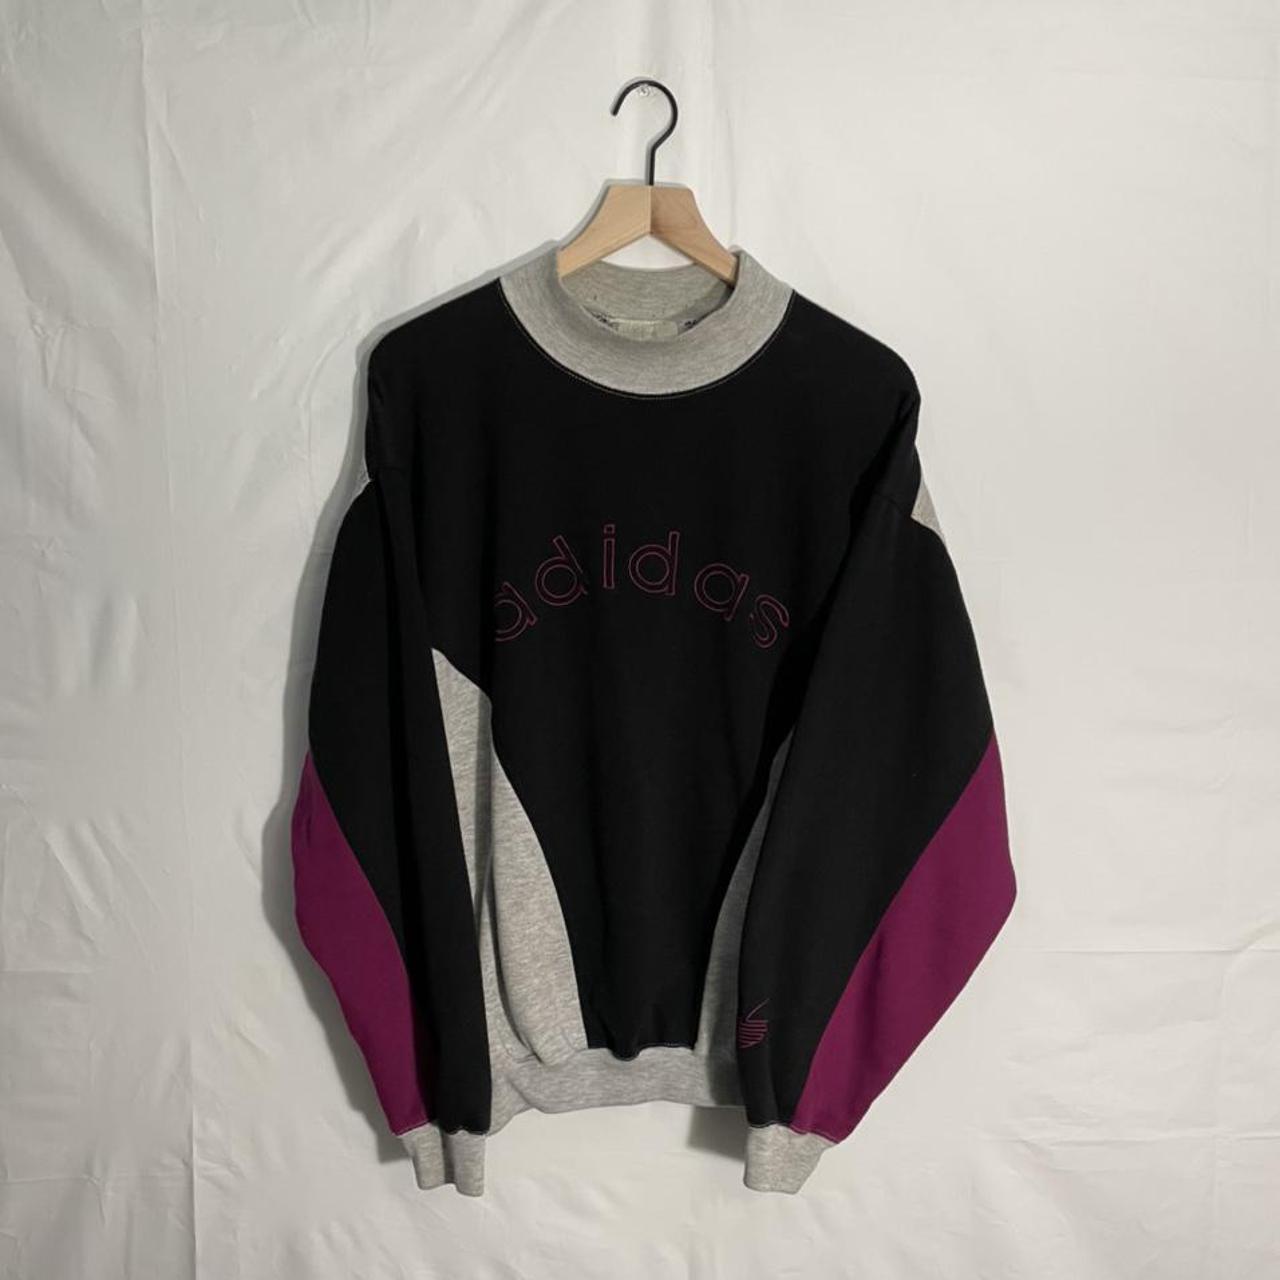 Product Image 1 - Adidas 80s Sweater 

Adidas Embroidered